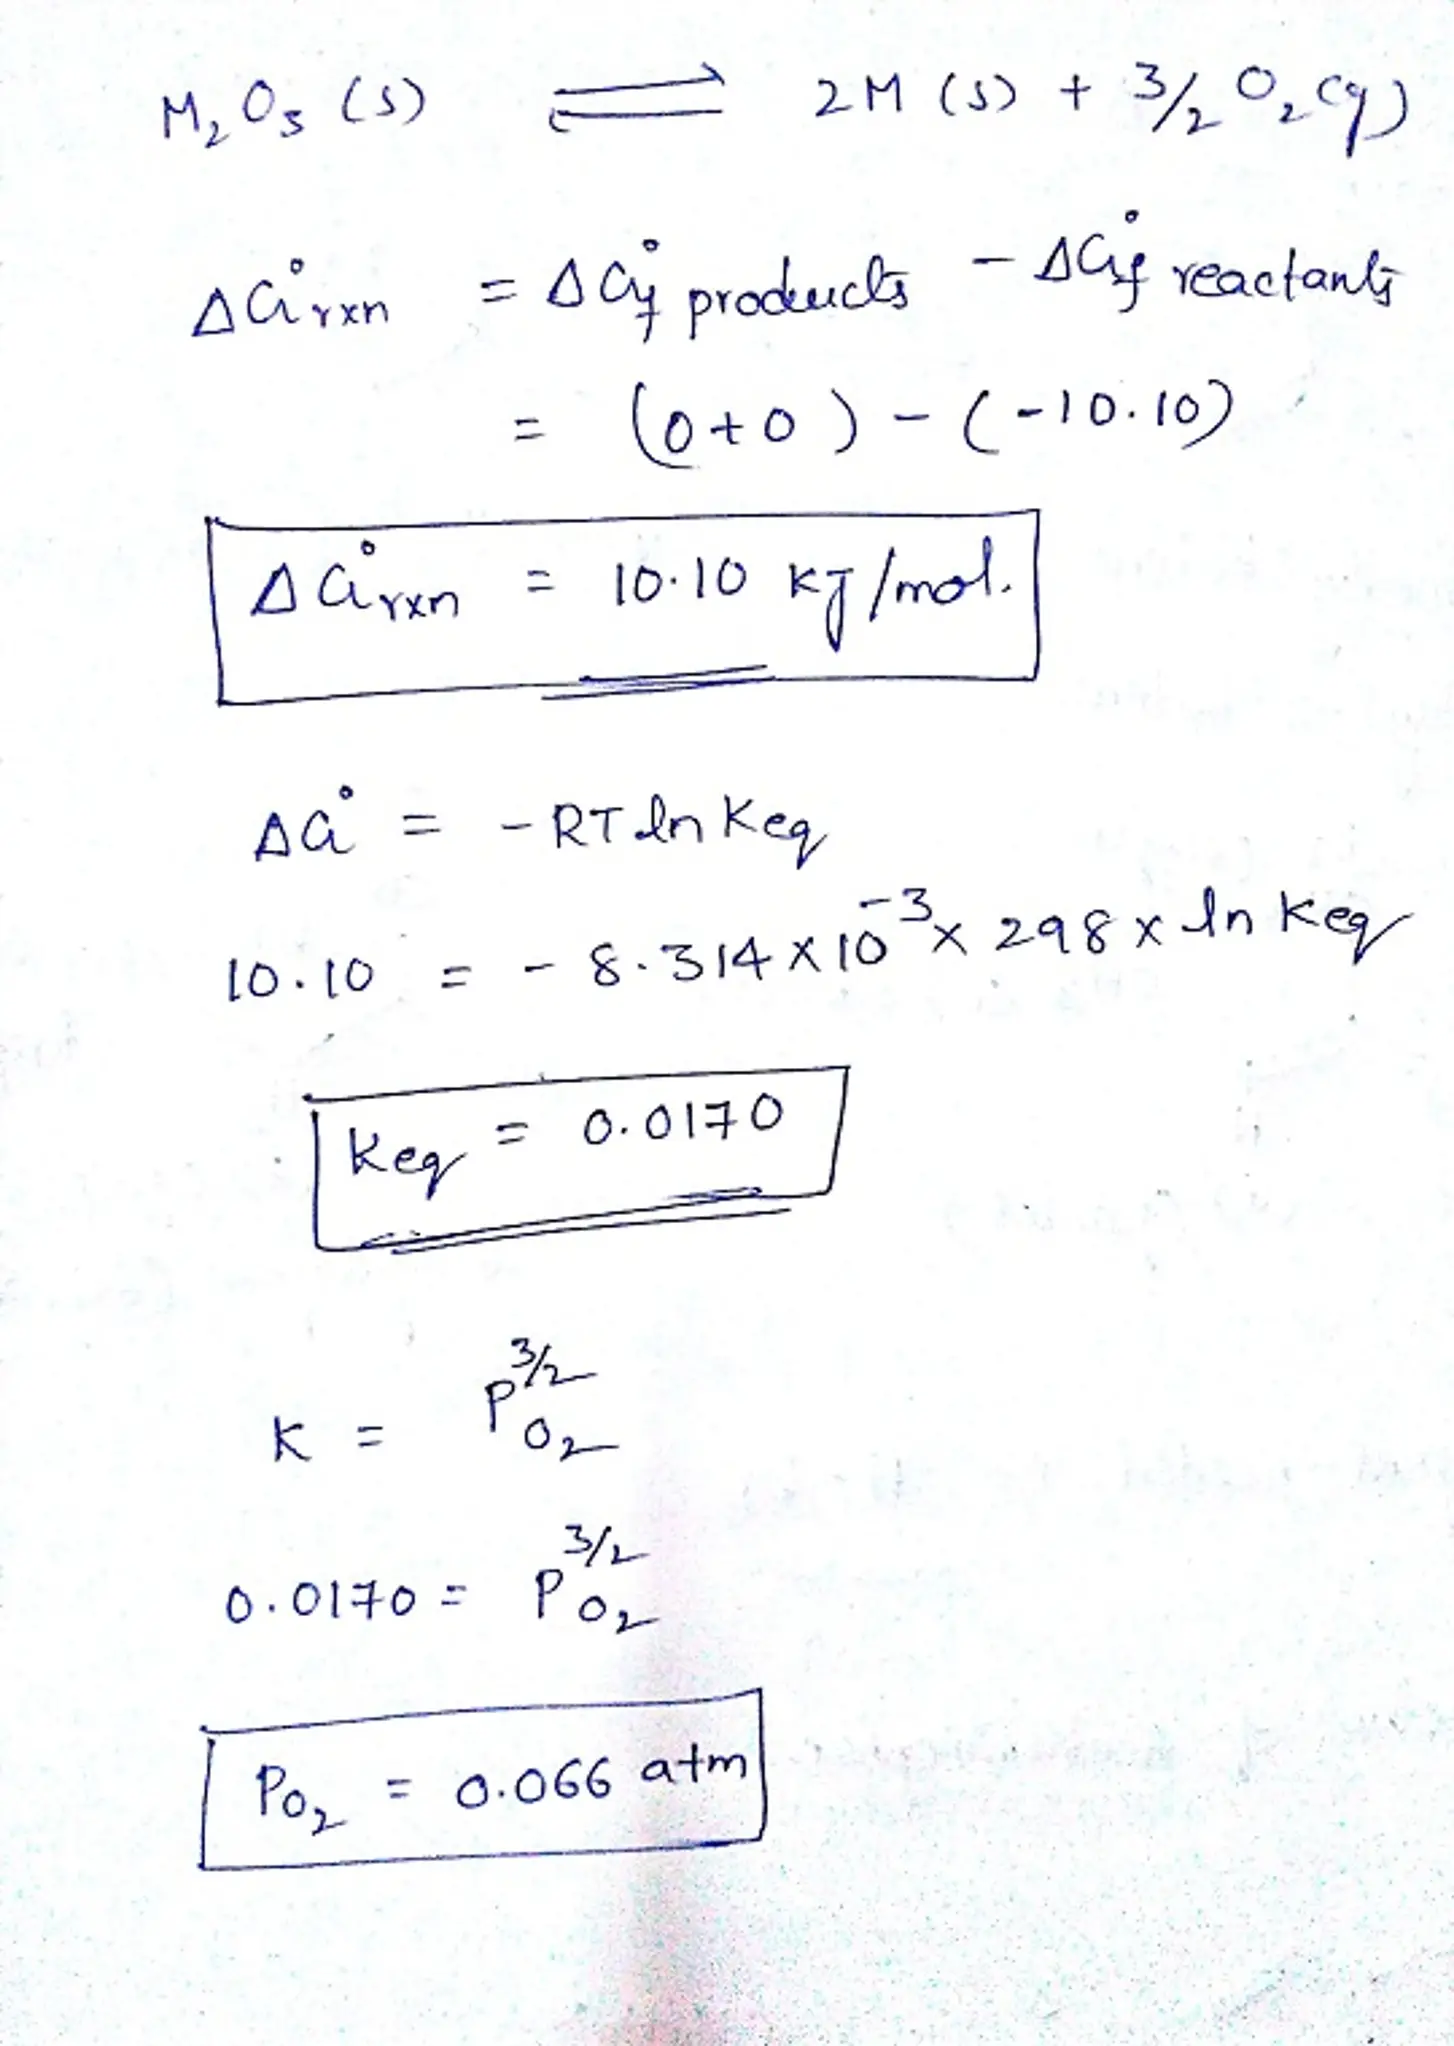 Consider the decomposition of a metal oxide to its elements,
where M represents a generic metal.
What is the standard change in Gibbs energy for the reaction, as
written, in the forward direction?
What is the equilibrium constant of this reaction, as written,
in the forward direction at 298 K?
What is the equilibrium pressure of O2(g) over M(s) at 298
K?

AGOf Substance (kJ/mol) Consider the decomposition of a metal oxide to its elements, where M represents a generic metal. M203 10.10 M(s) 2Mls) -O O2(g) What is the standard change in Gibbs energy for the reaction, as written, in the forward direction? Number AG k J mol rXII What is the equilibrium constant of this reaction, as written, in the forward direction at 298 K? Number What is the equilibrium pressure of O2(g) over M(s) at 298 K? Number atm Tools